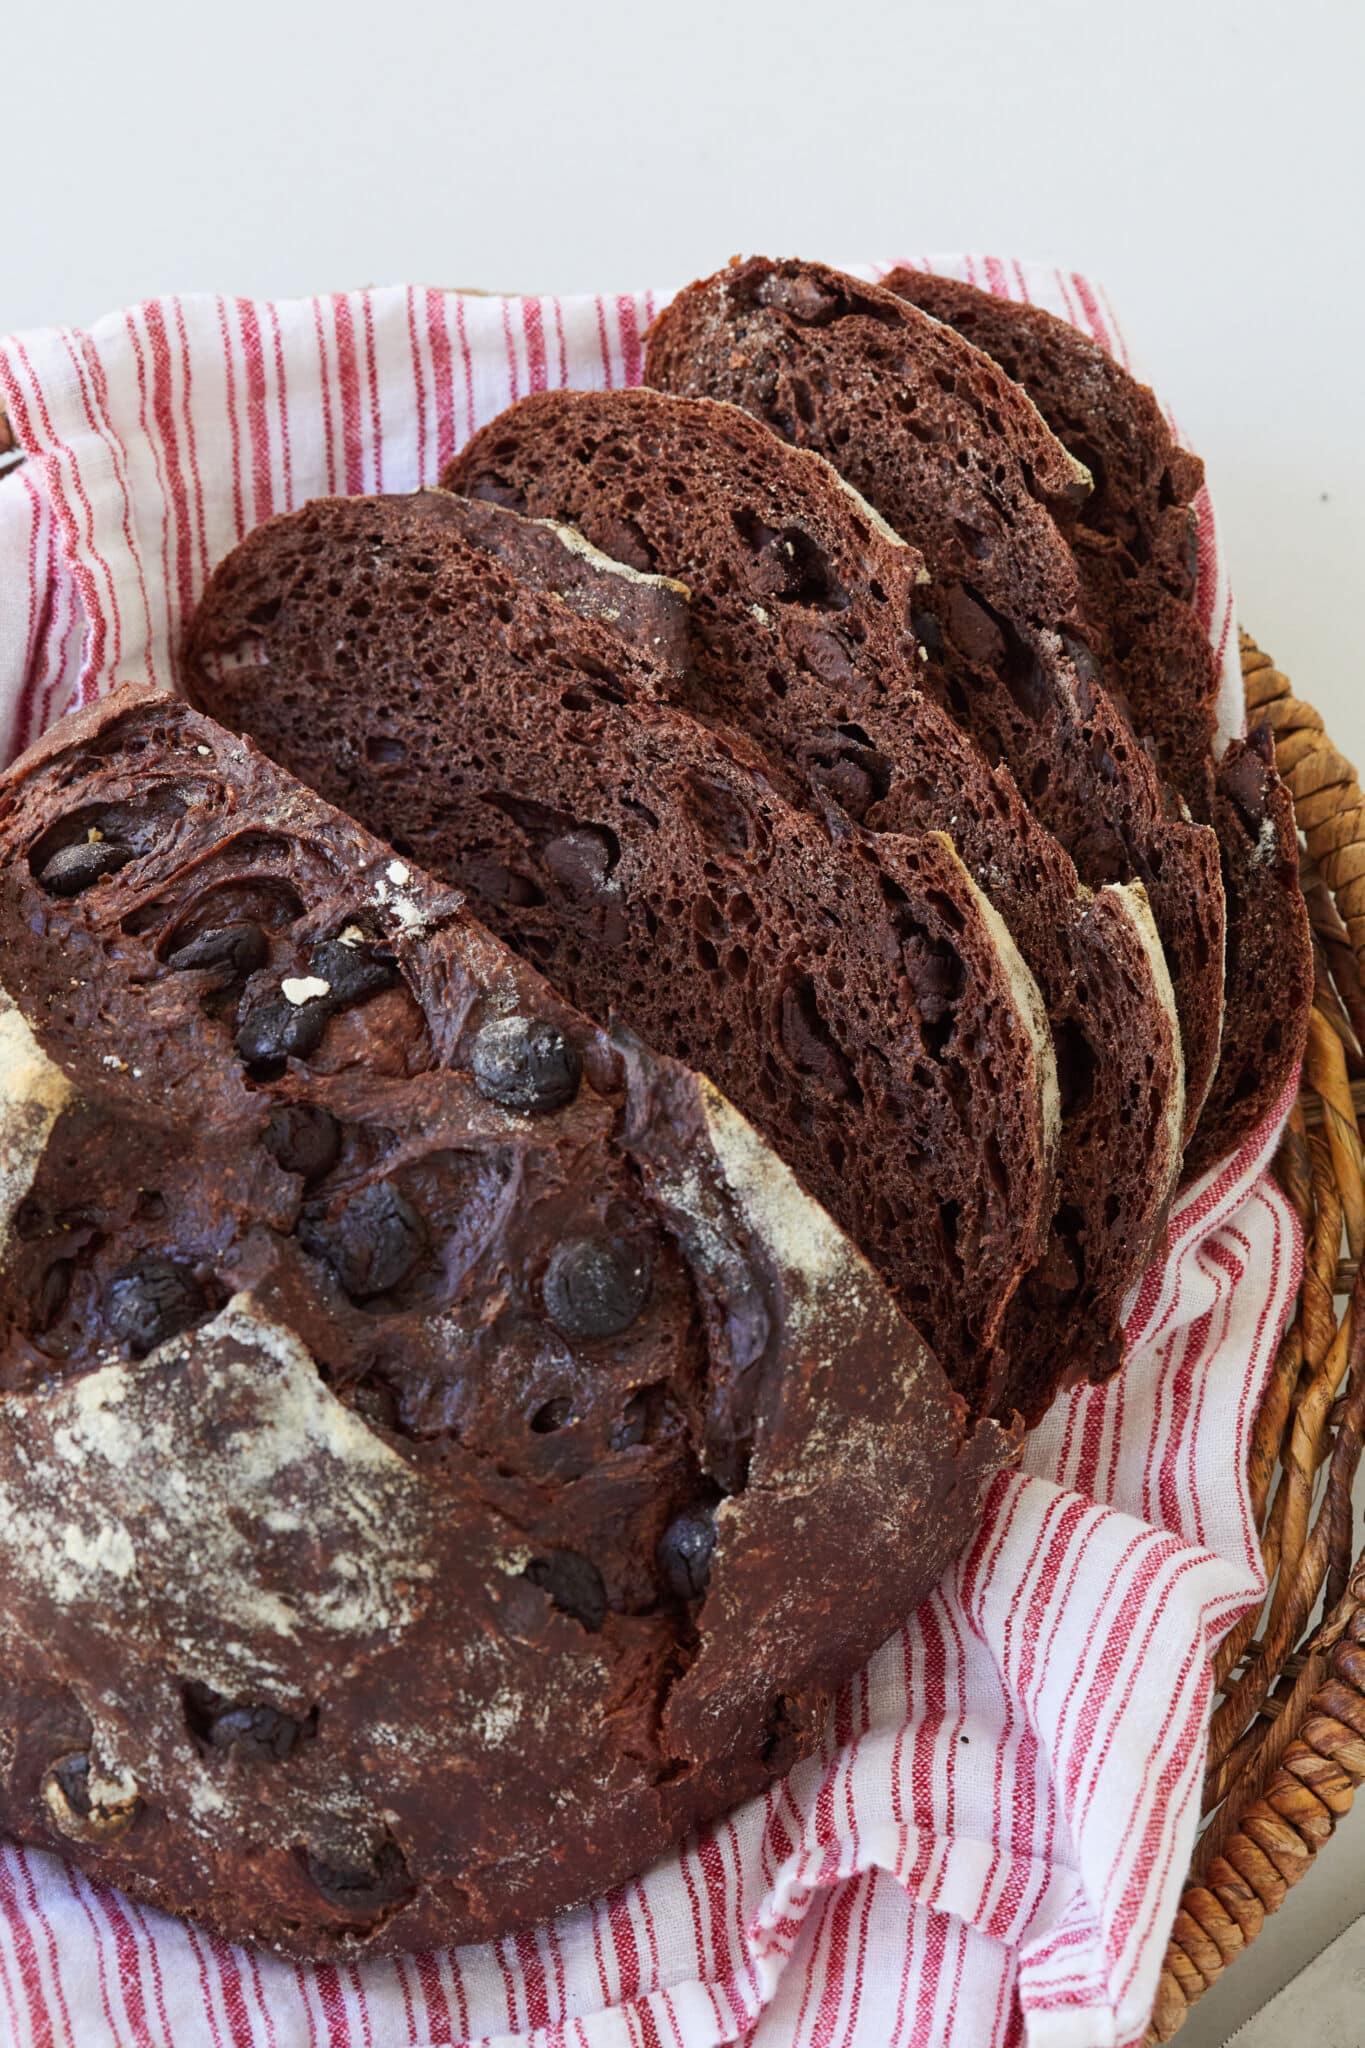 A close-up shot at loaf of Chocolate Bread on a kitchen towel in a bread basket. It's sliced and has a dark-chocolate color with crispy crust and a cross score on top, loaded with chocolate chips. The inner crumb looks very tender and bubbly.